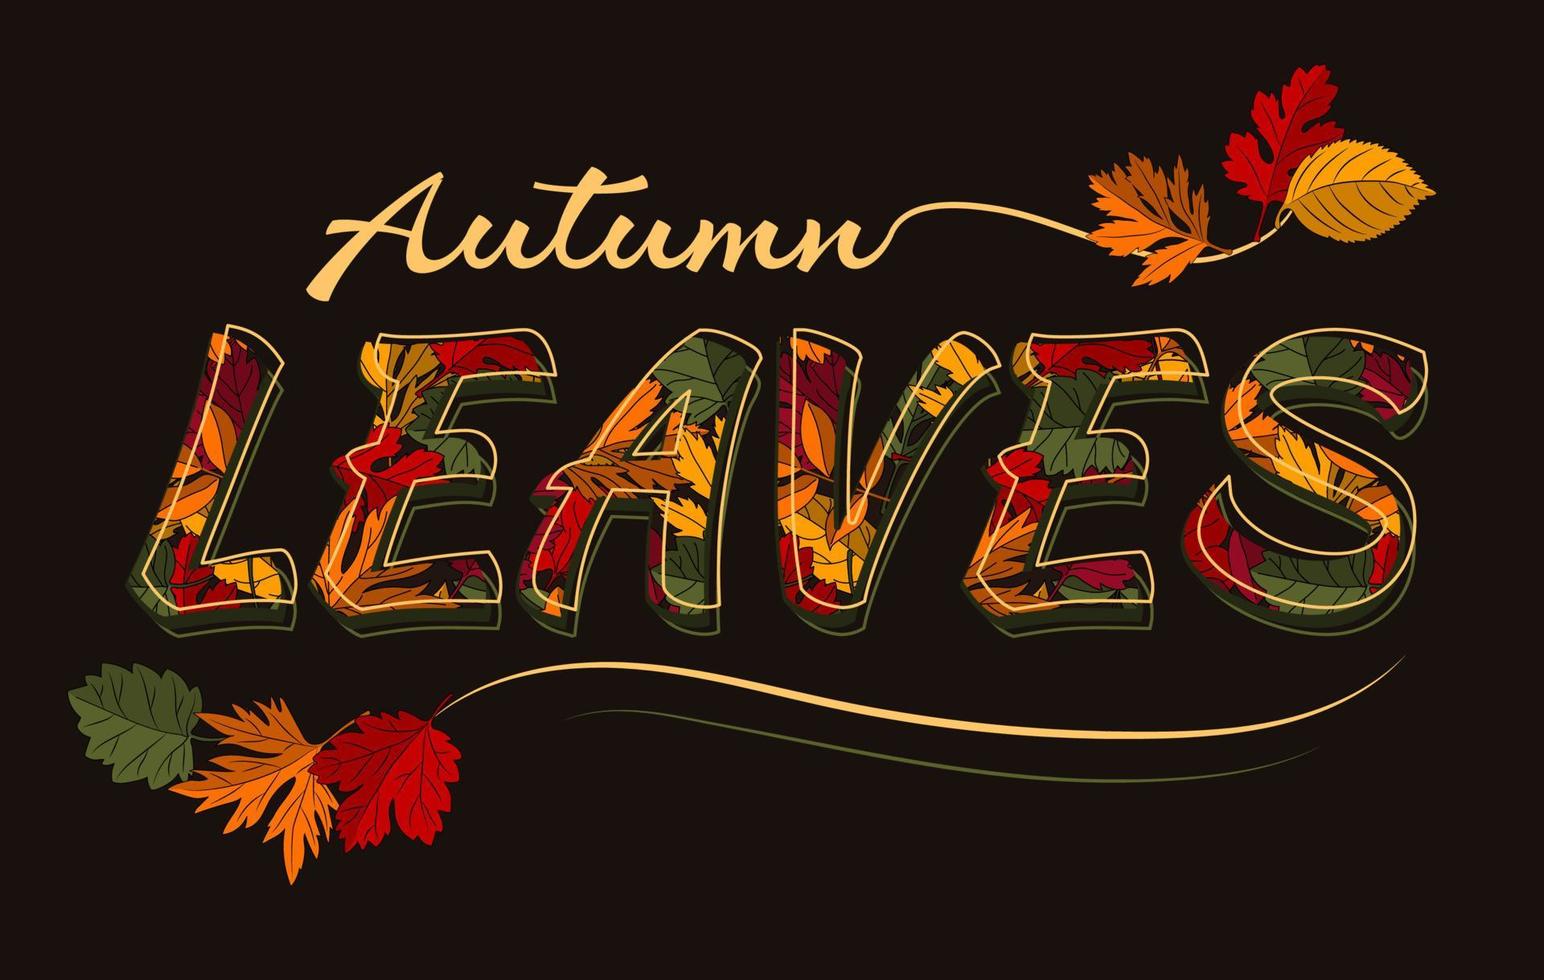 Print with inscription and color autumn leaves on dark background. Inscription Autumn Leaves for apparel design. Isolated vector illustration.